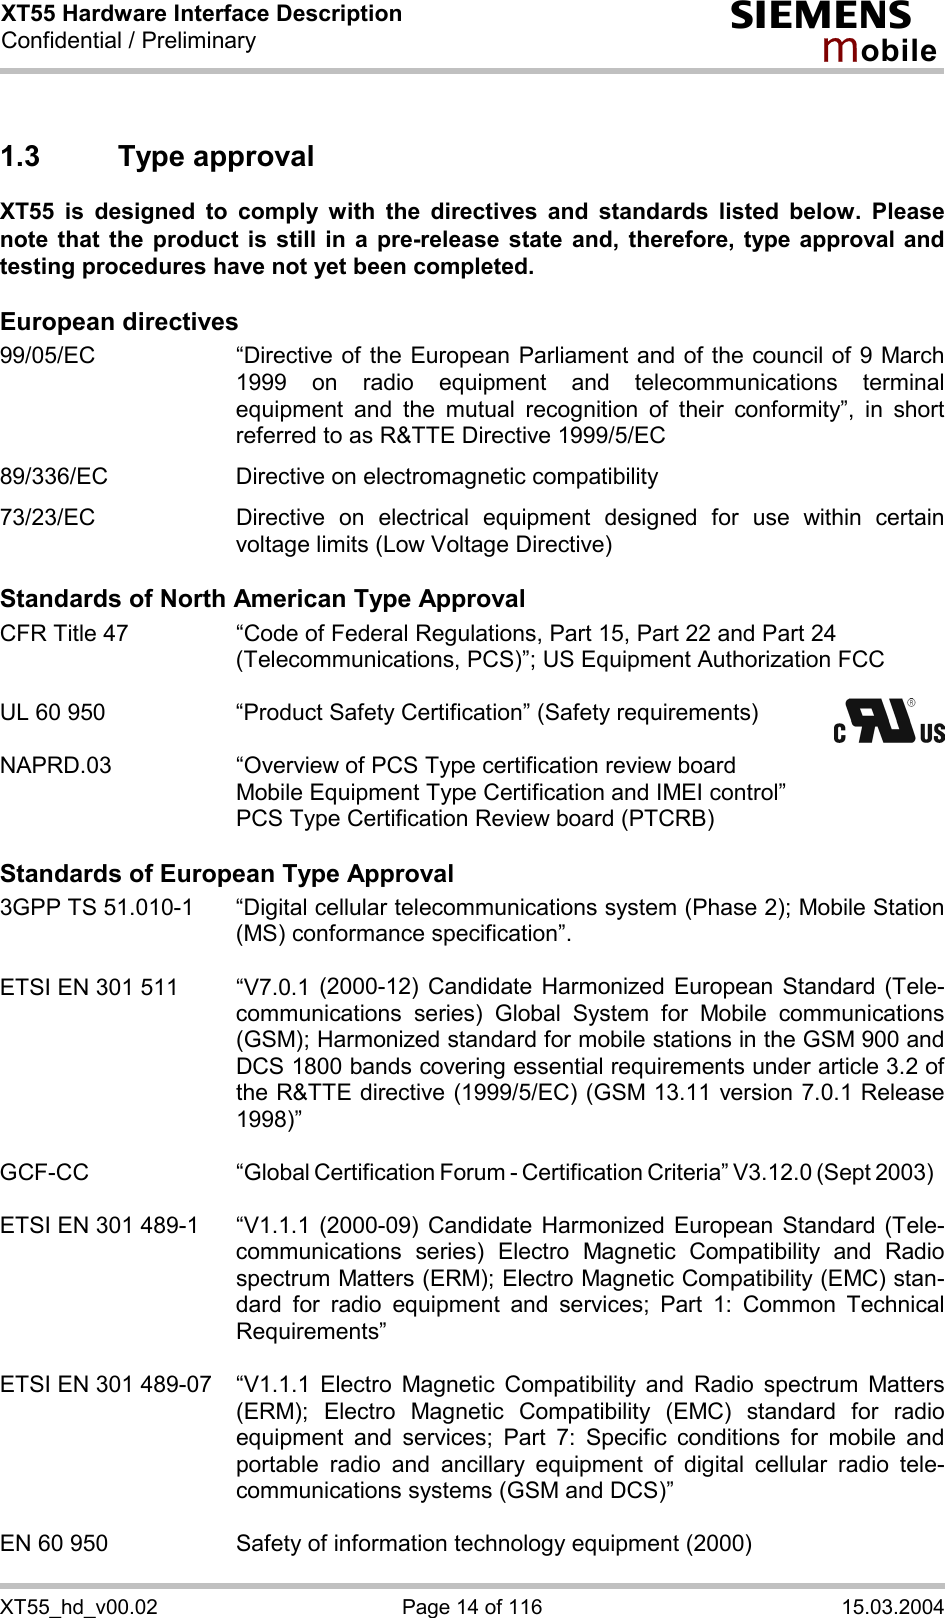 XT55 Hardware Interface Description Confidential / Preliminary s mo b i l e XT55_hd_v00.02  Page 14 of 116  15.03.2004 1.3 Type approval XT55 is designed to comply with the directives and standards listed below. Please note that the product is still in a pre-release state and, therefore, type approval and testing procedures have not yet been completed.   European directives 99/05/EC  “Directive of the European Parliament and of the council of 9 March 1999 on radio equipment and telecommunications terminal equipment and the mutual recognition of their conformity”, in short referred to as R&amp;TTE Directive 1999/5/EC  89/336/EC  Directive on electromagnetic compatibility  73/23/EC  Directive on electrical equipment designed for use within certain voltage limits (Low Voltage Directive)  Standards of North American Type Approval CFR Title 47  “Code of Federal Regulations, Part 15, Part 22 and Part 24 (Telecommunications, PCS)”; US Equipment Authorization FCC  UL 60 950  “Product Safety Certification” (Safety requirements)    NAPRD.03  “Overview of PCS Type certification review board      Mobile Equipment Type Certification and IMEI control”     PCS Type Certification Review board (PTCRB)  Standards of European Type Approval 3GPP TS 51.010-1  “Digital cellular telecommunications system (Phase 2); Mobile Station (MS) conformance specification”.   ETSI EN 301 511  “V7.0.1 (2000-12) Candidate Harmonized European Standard (Tele-communications series) Global System for Mobile communications (GSM); Harmonized standard for mobile stations in the GSM 900 and DCS 1800 bands covering essential requirements under article 3.2 of the R&amp;TTE directive (1999/5/EC) (GSM 13.11 version 7.0.1 Release 1998)”   GCF-CC “Global Certification Forum - Certification Criteria” V3.12.0 (Sept 2003)  ETSI EN 301 489-1  “V1.1.1 (2000-09) Candidate Harmonized European Standard (Tele-communications series) Electro Magnetic Compatibility and Radio spectrum Matters (ERM); Electro Magnetic Compatibility (EMC) stan-dard for radio equipment and services; Part 1: Common Technical Requirements”  ETSI EN 301 489-07  “V1.1.1 Electro Magnetic Compatibility and Radio spectrum Matters (ERM); Electro Magnetic Compatibility (EMC) standard for radio equipment and services; Part 7: Specific conditions for mobile and portable radio and ancillary equipment of digital cellular radio tele-communications systems (GSM and DCS)”   EN 60 950  Safety of information technology equipment (2000) 